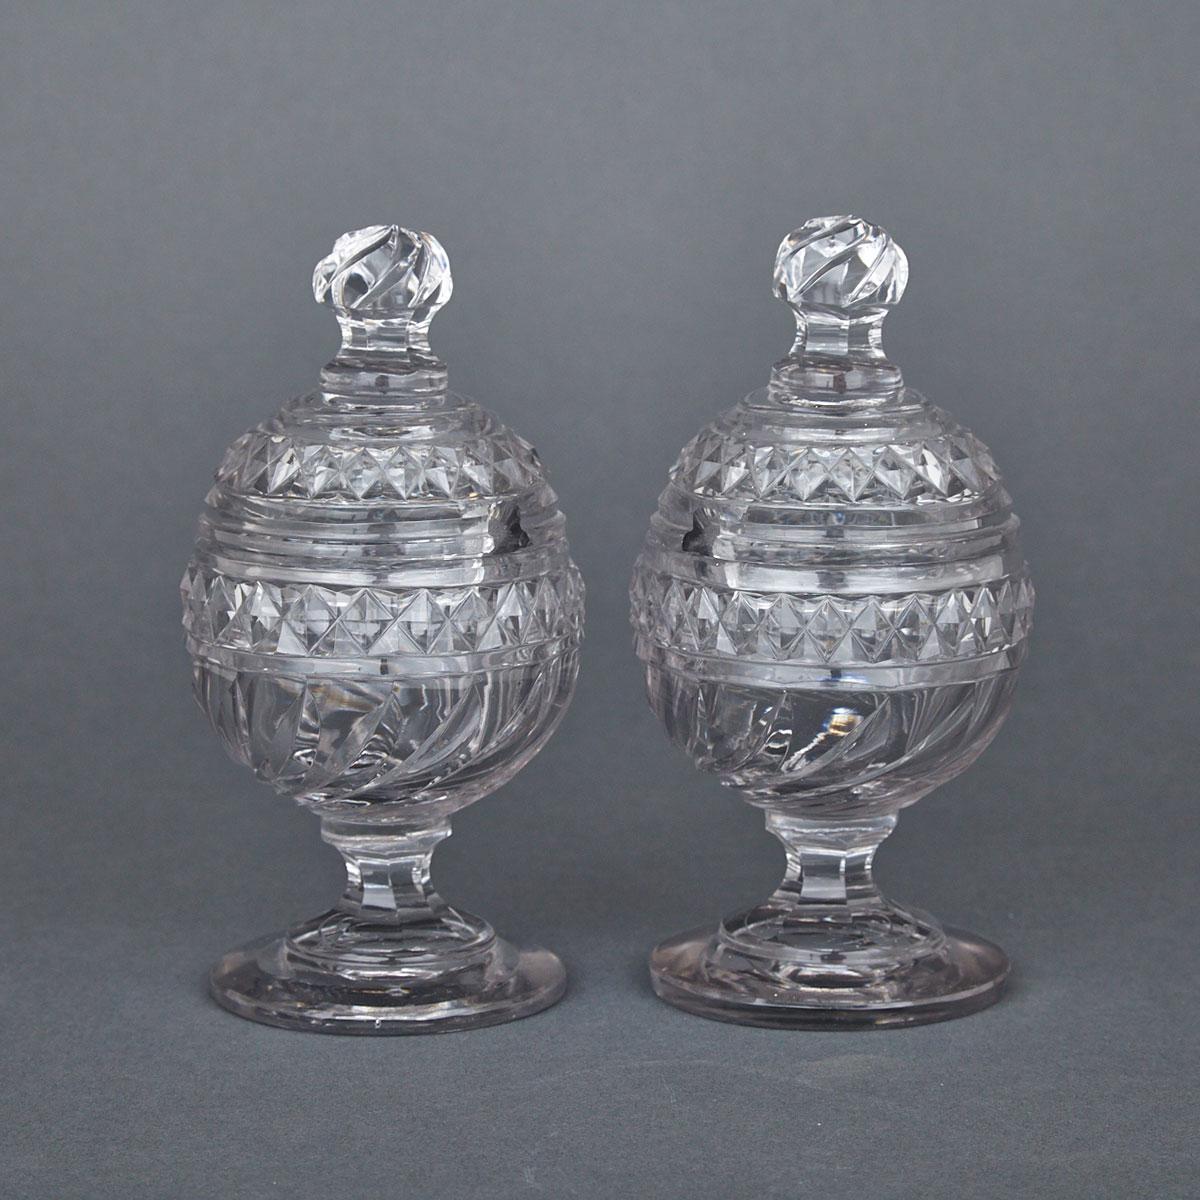 Pair of Anglo-Irish Cut Glass Sweetmeat Jars with Covers, early 19th century